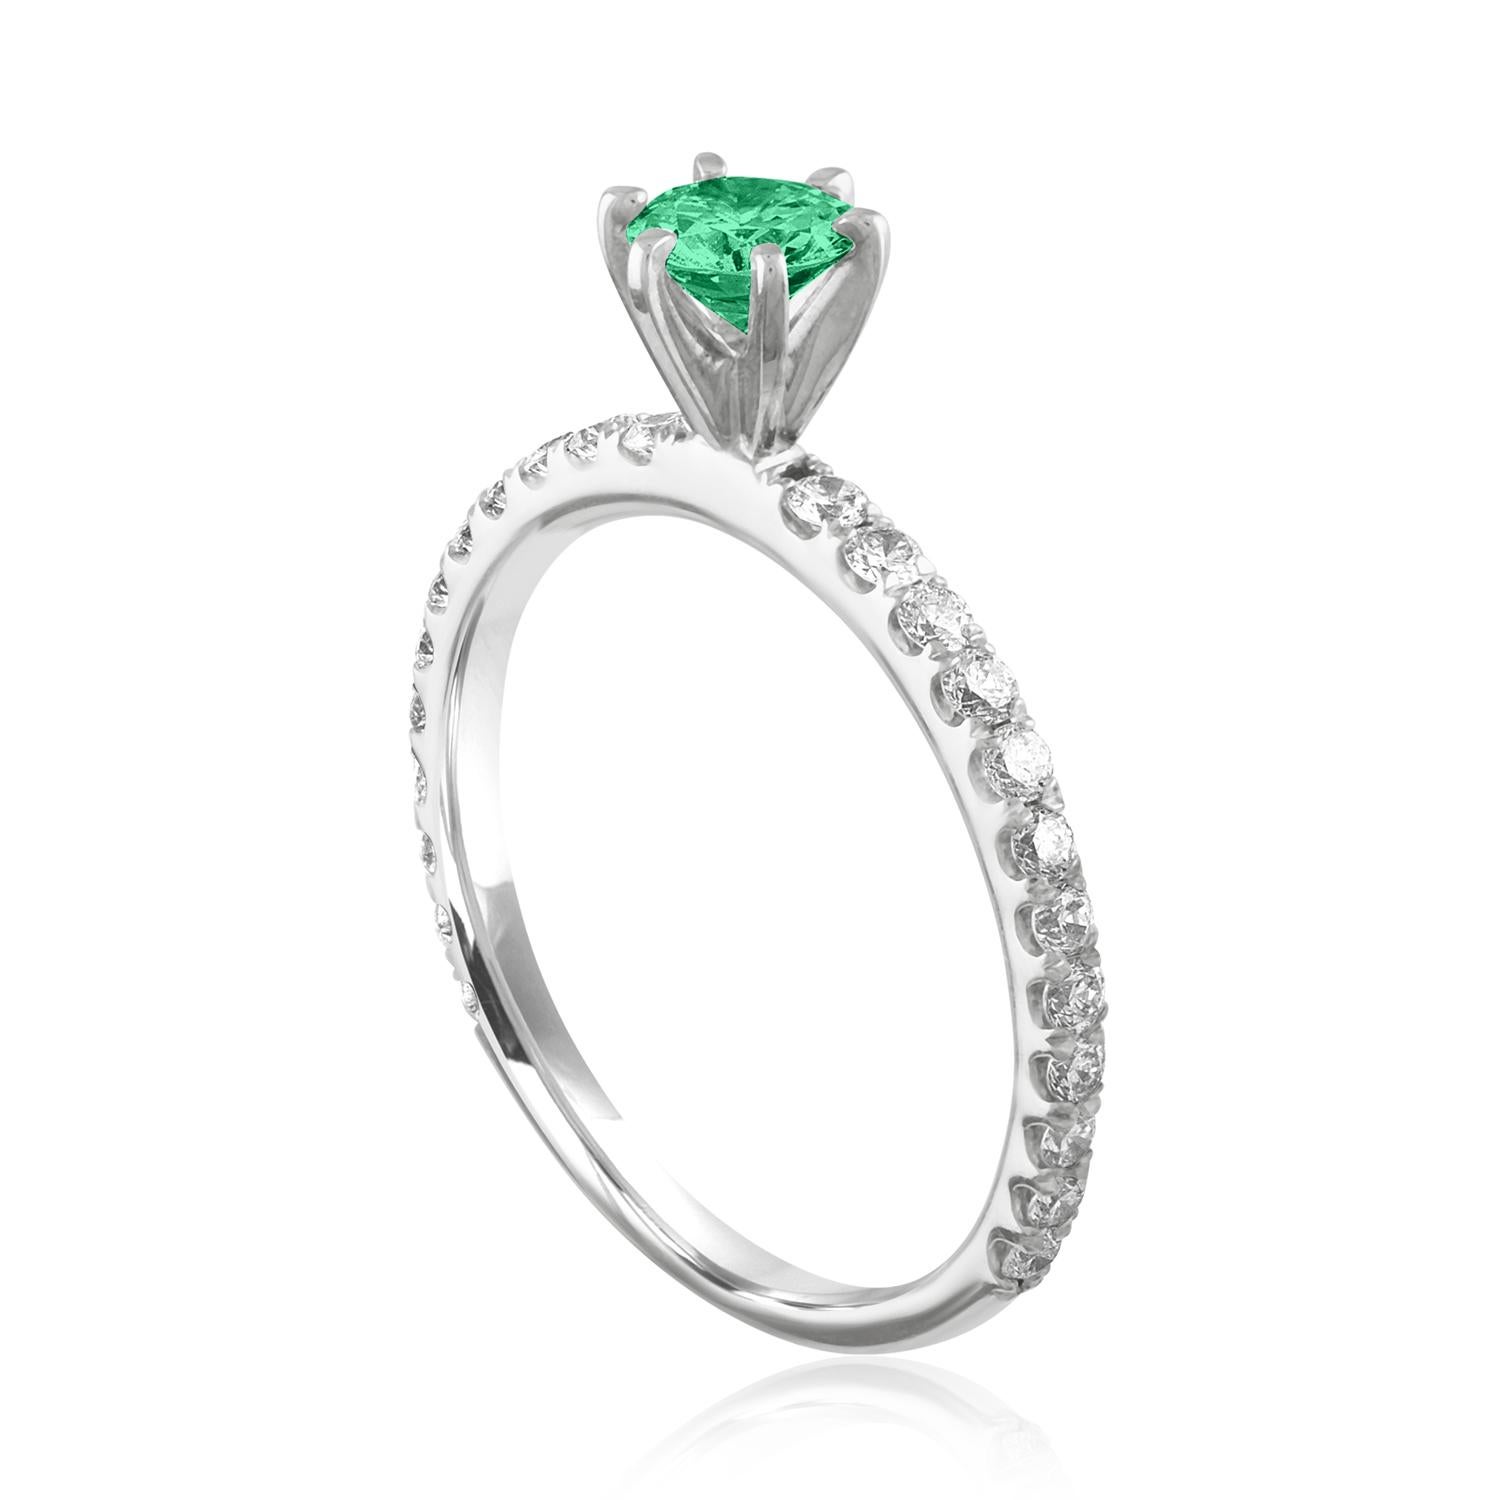 Beautiful Diamond & Emerald Ring
The ring is 18K White Gold.
There are 0.45 Carats in Diamonds F/G VS/SI
The Center is Round 0.46 Carat Emerald.
The Emerald is AGL certified.
The ring is a size 6.00, sizable.
The ring weighs 1.9 grams.